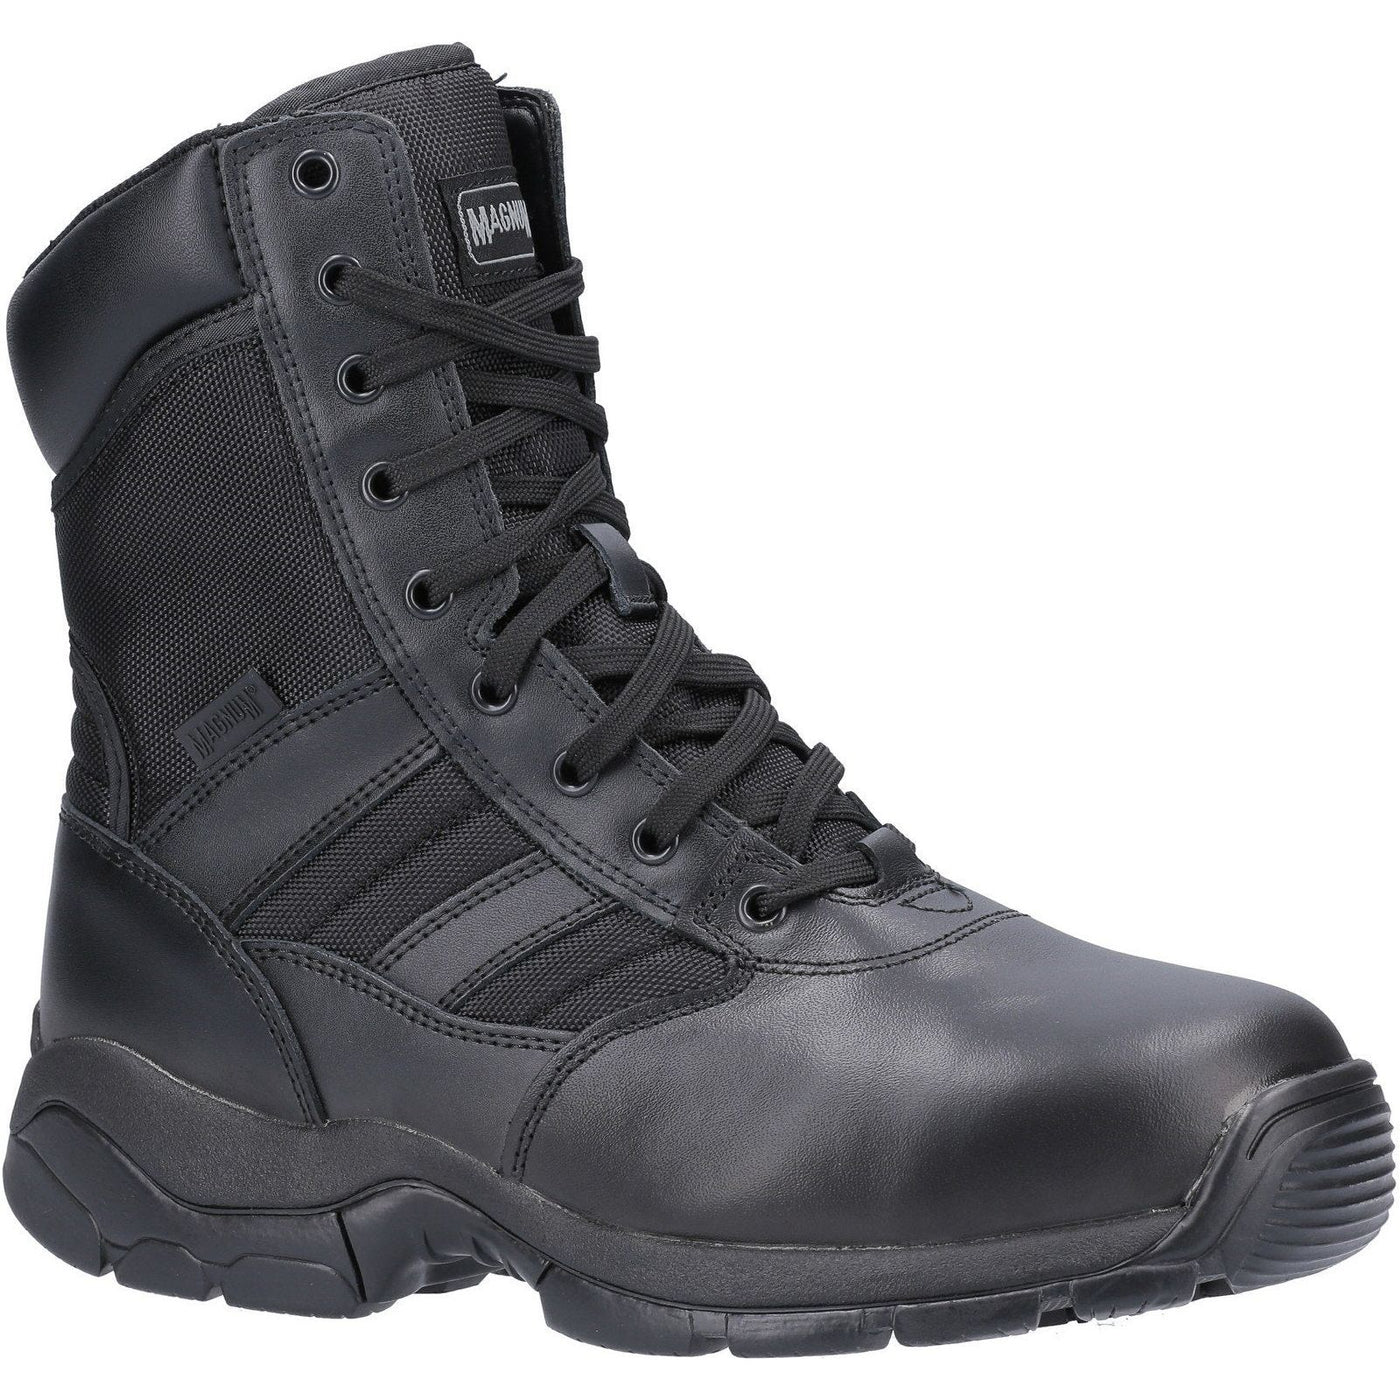 Magnum Panther 8.0 Steel Toe Safety Boots Mens